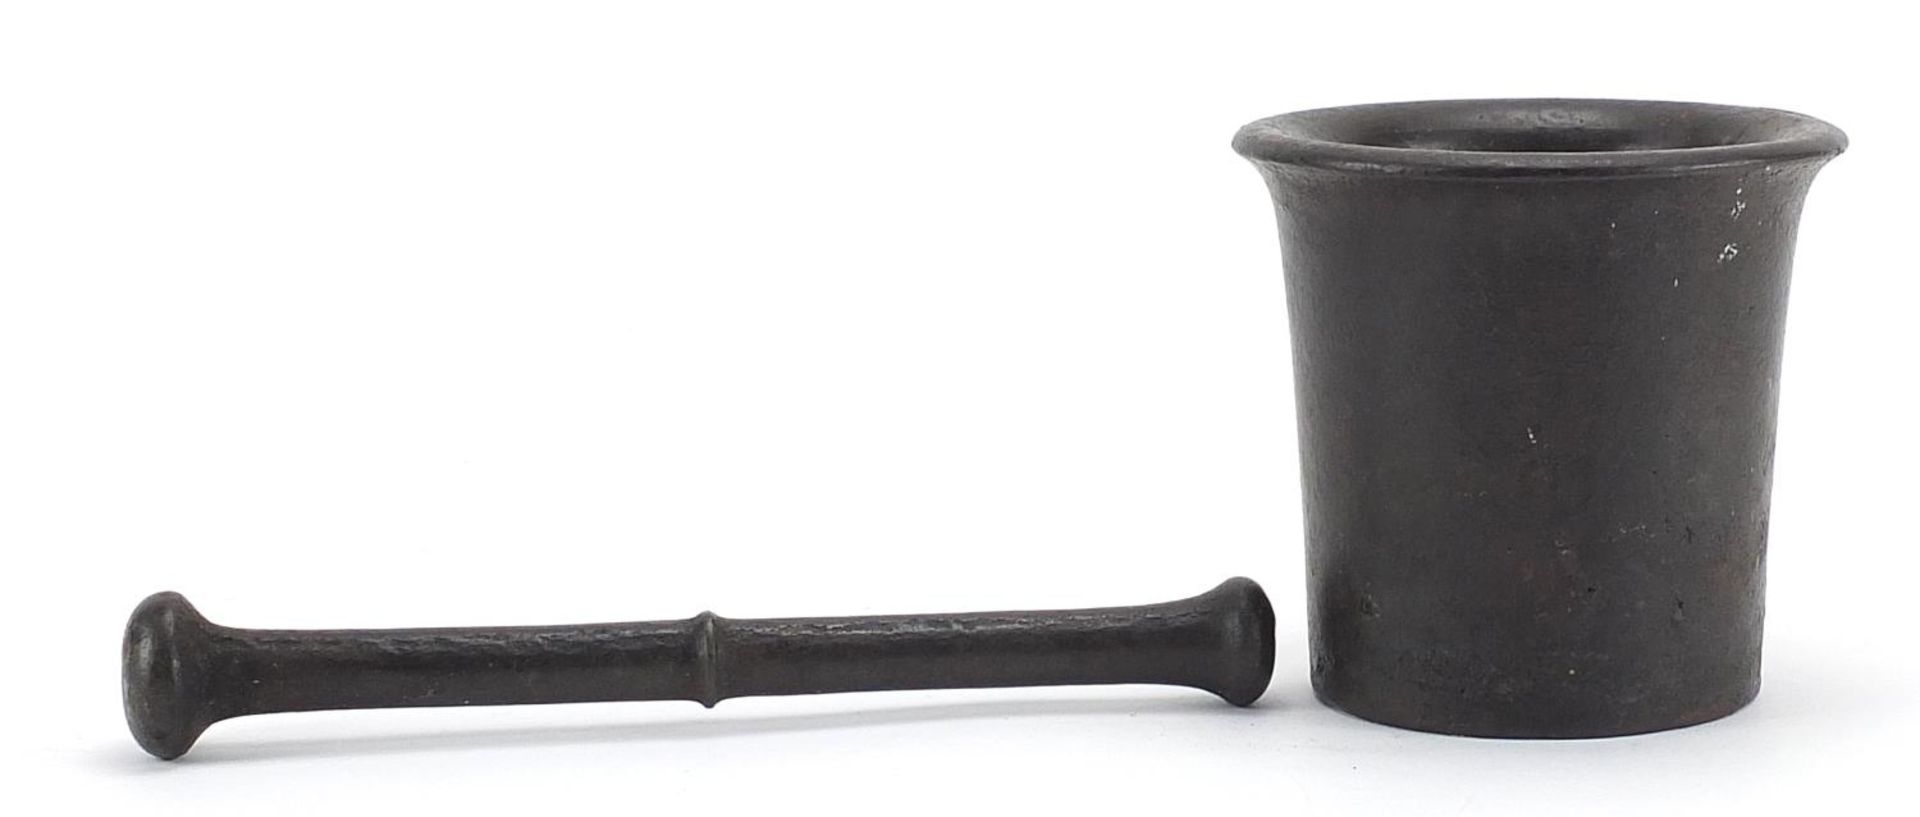 Antique bronzed pestle and mortar, the mortar 12cm high - Image 2 of 4